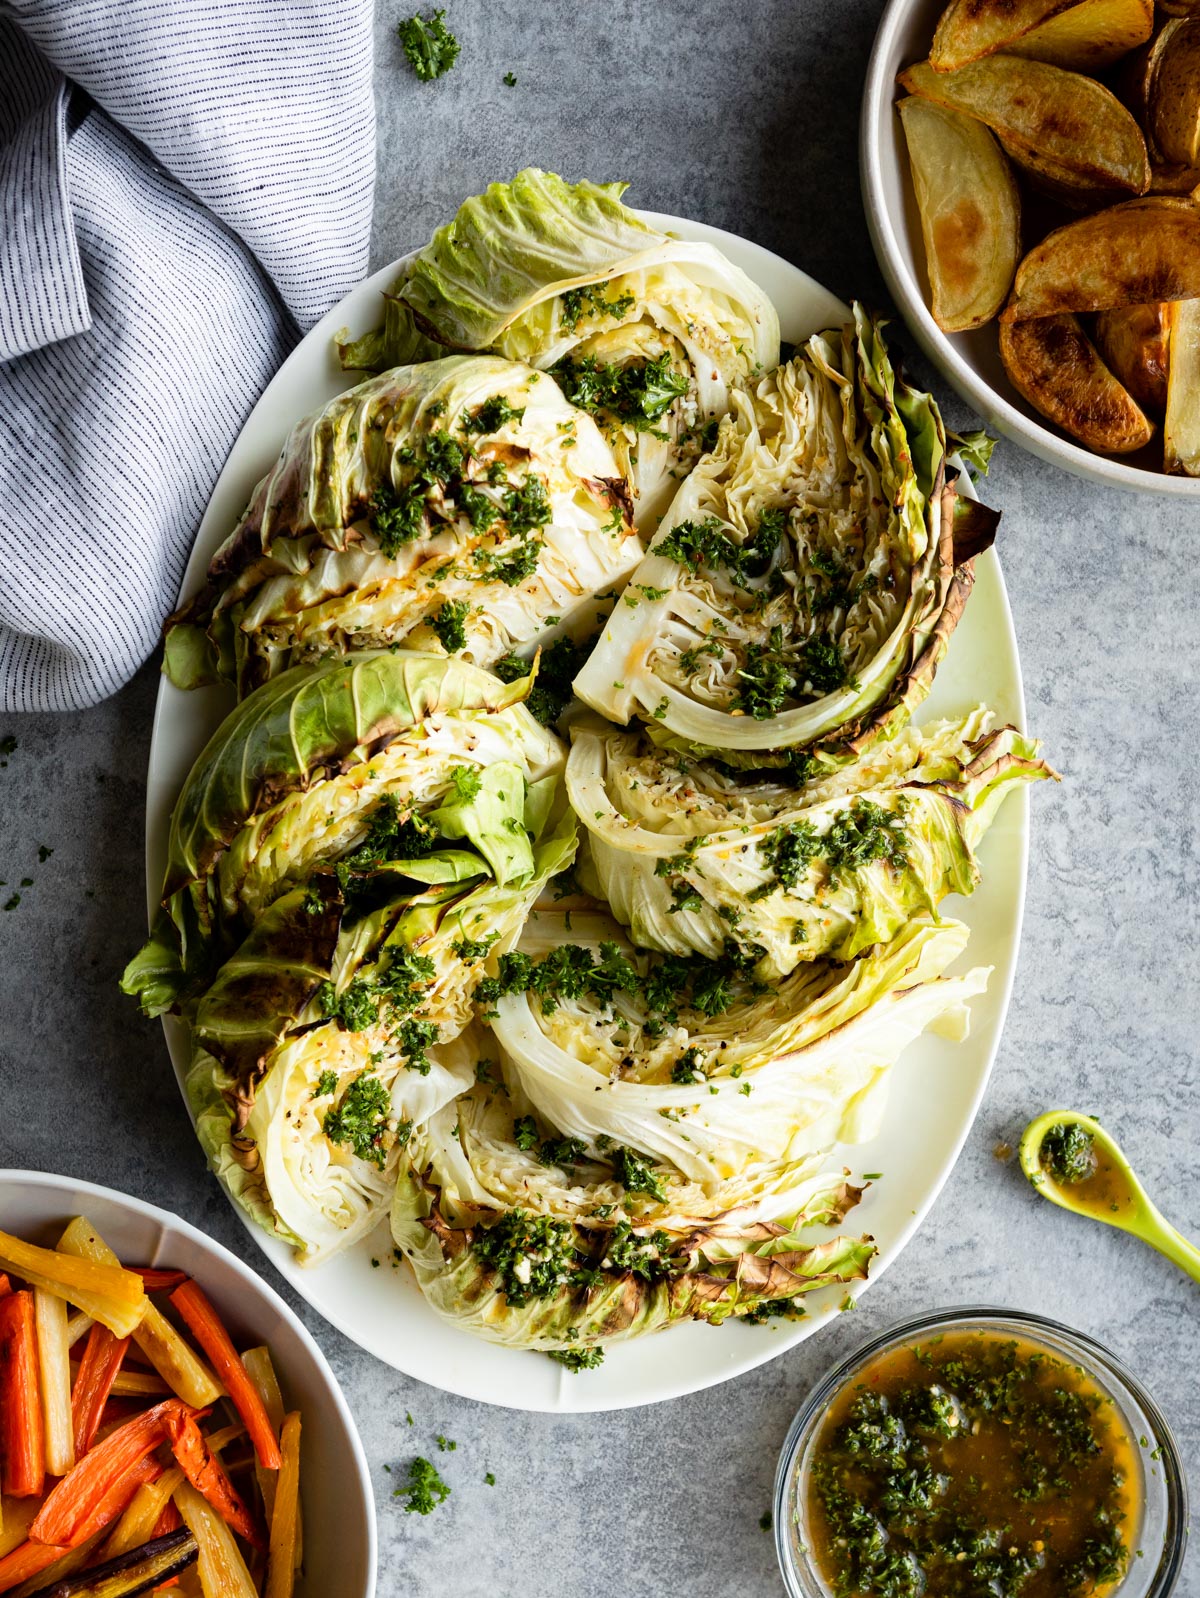 roasted cabbage with parsley seasoning and a bowl of potato wedges.